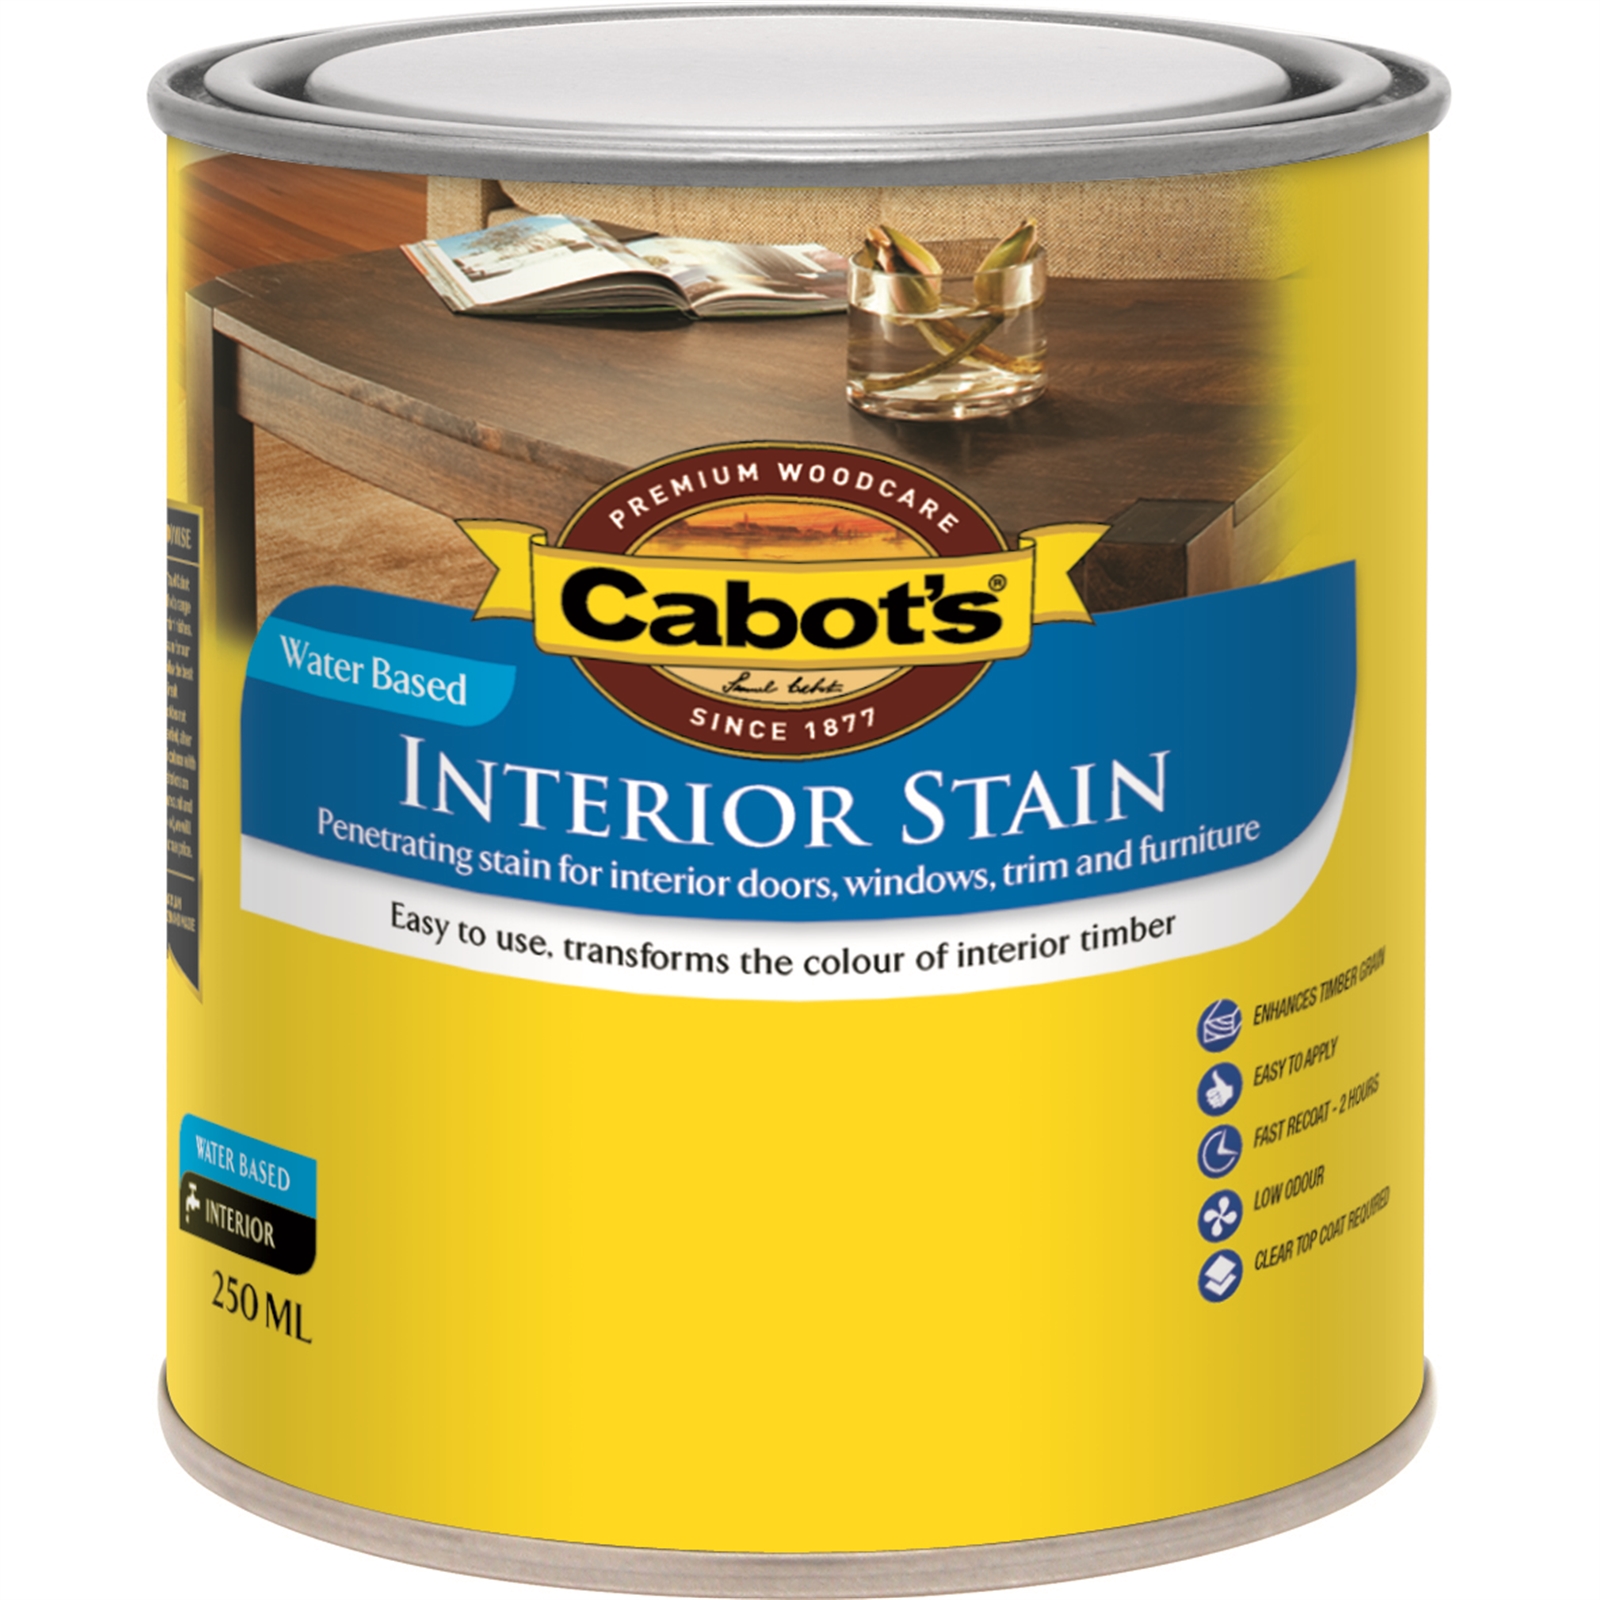 Cabot's 250ml Maple Water Based Interior Stain